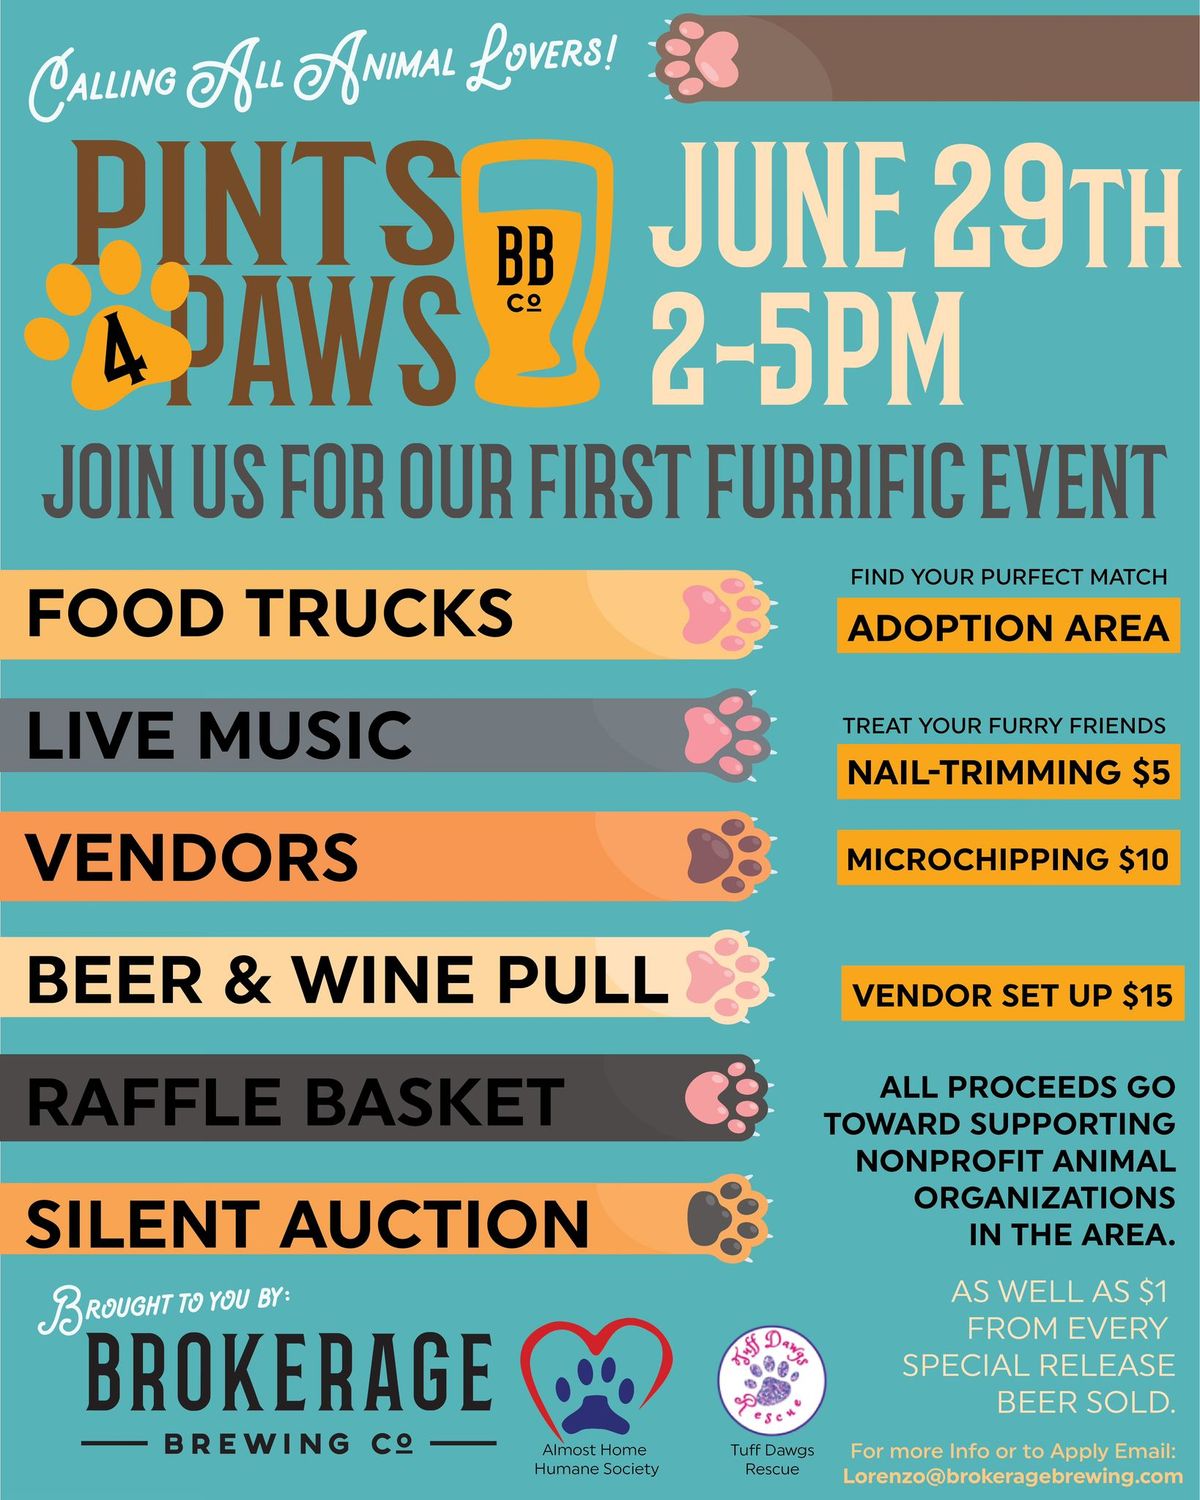 Pints 4 Paws Fundraising Event